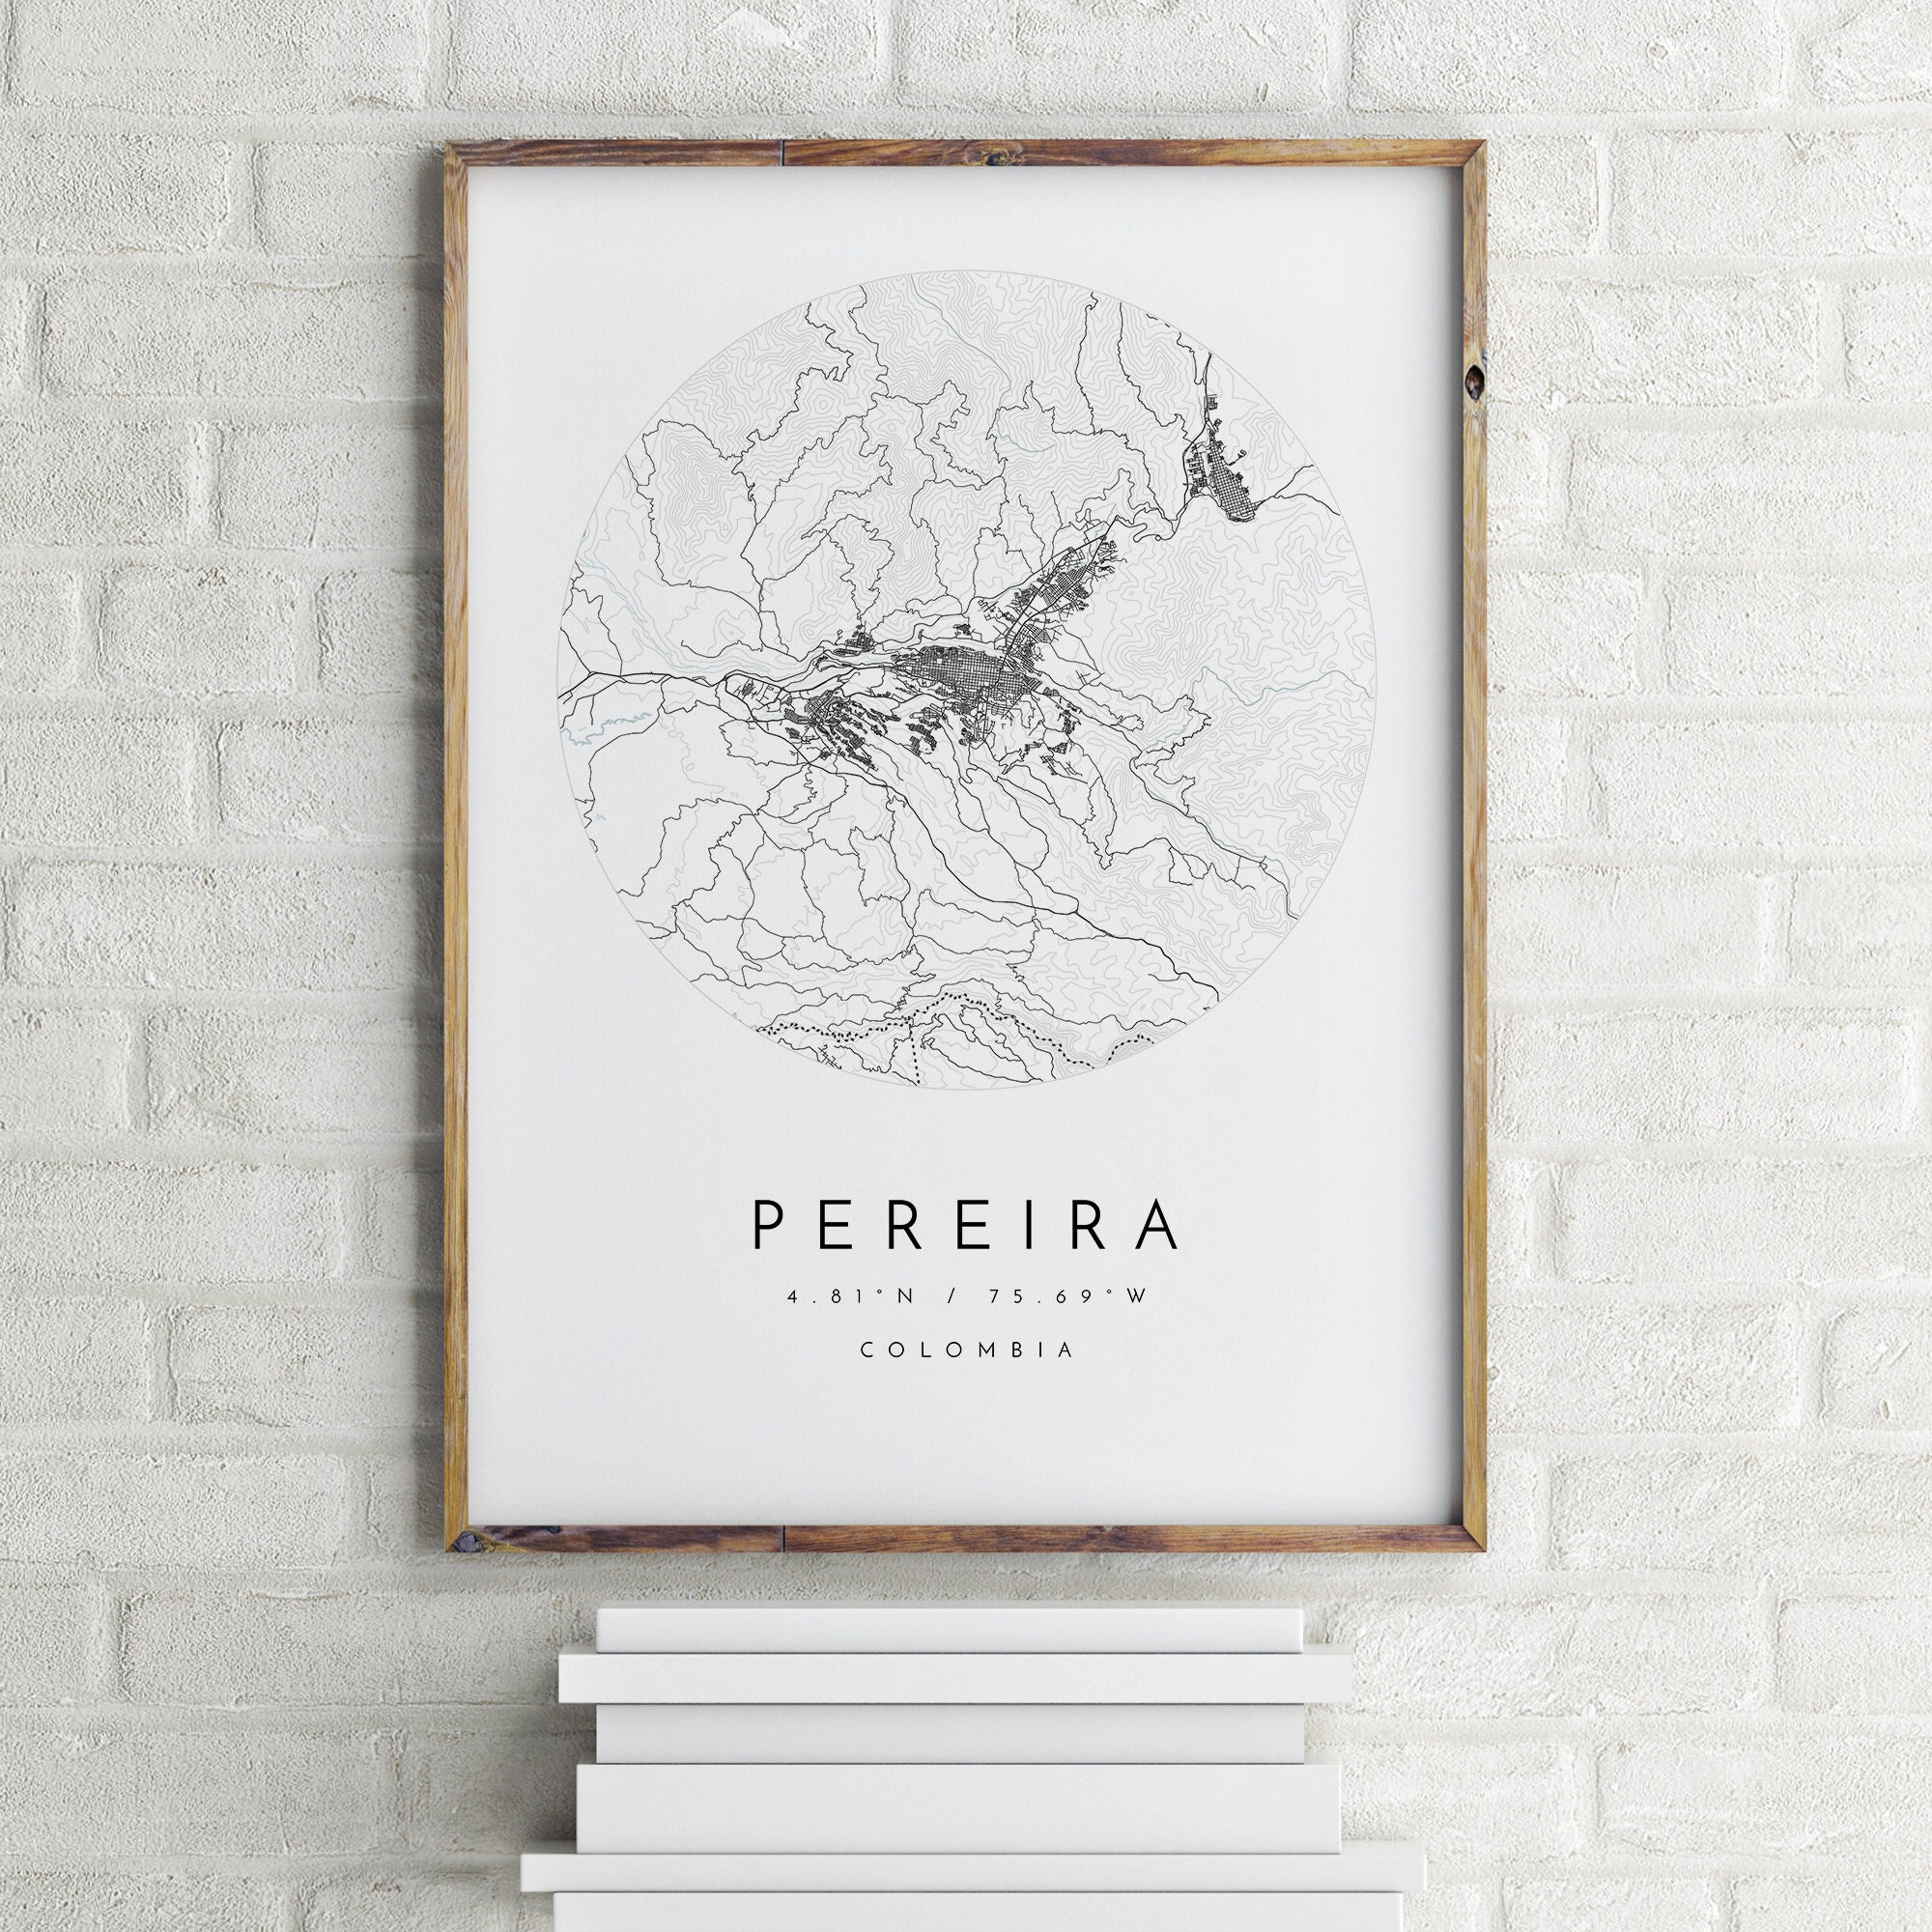 Pereira Map, Pereira, Colombia, City Map, Home Town Map, Pereira Print, Gift Map, Map Poster, Minimalist Map Art, mapologist